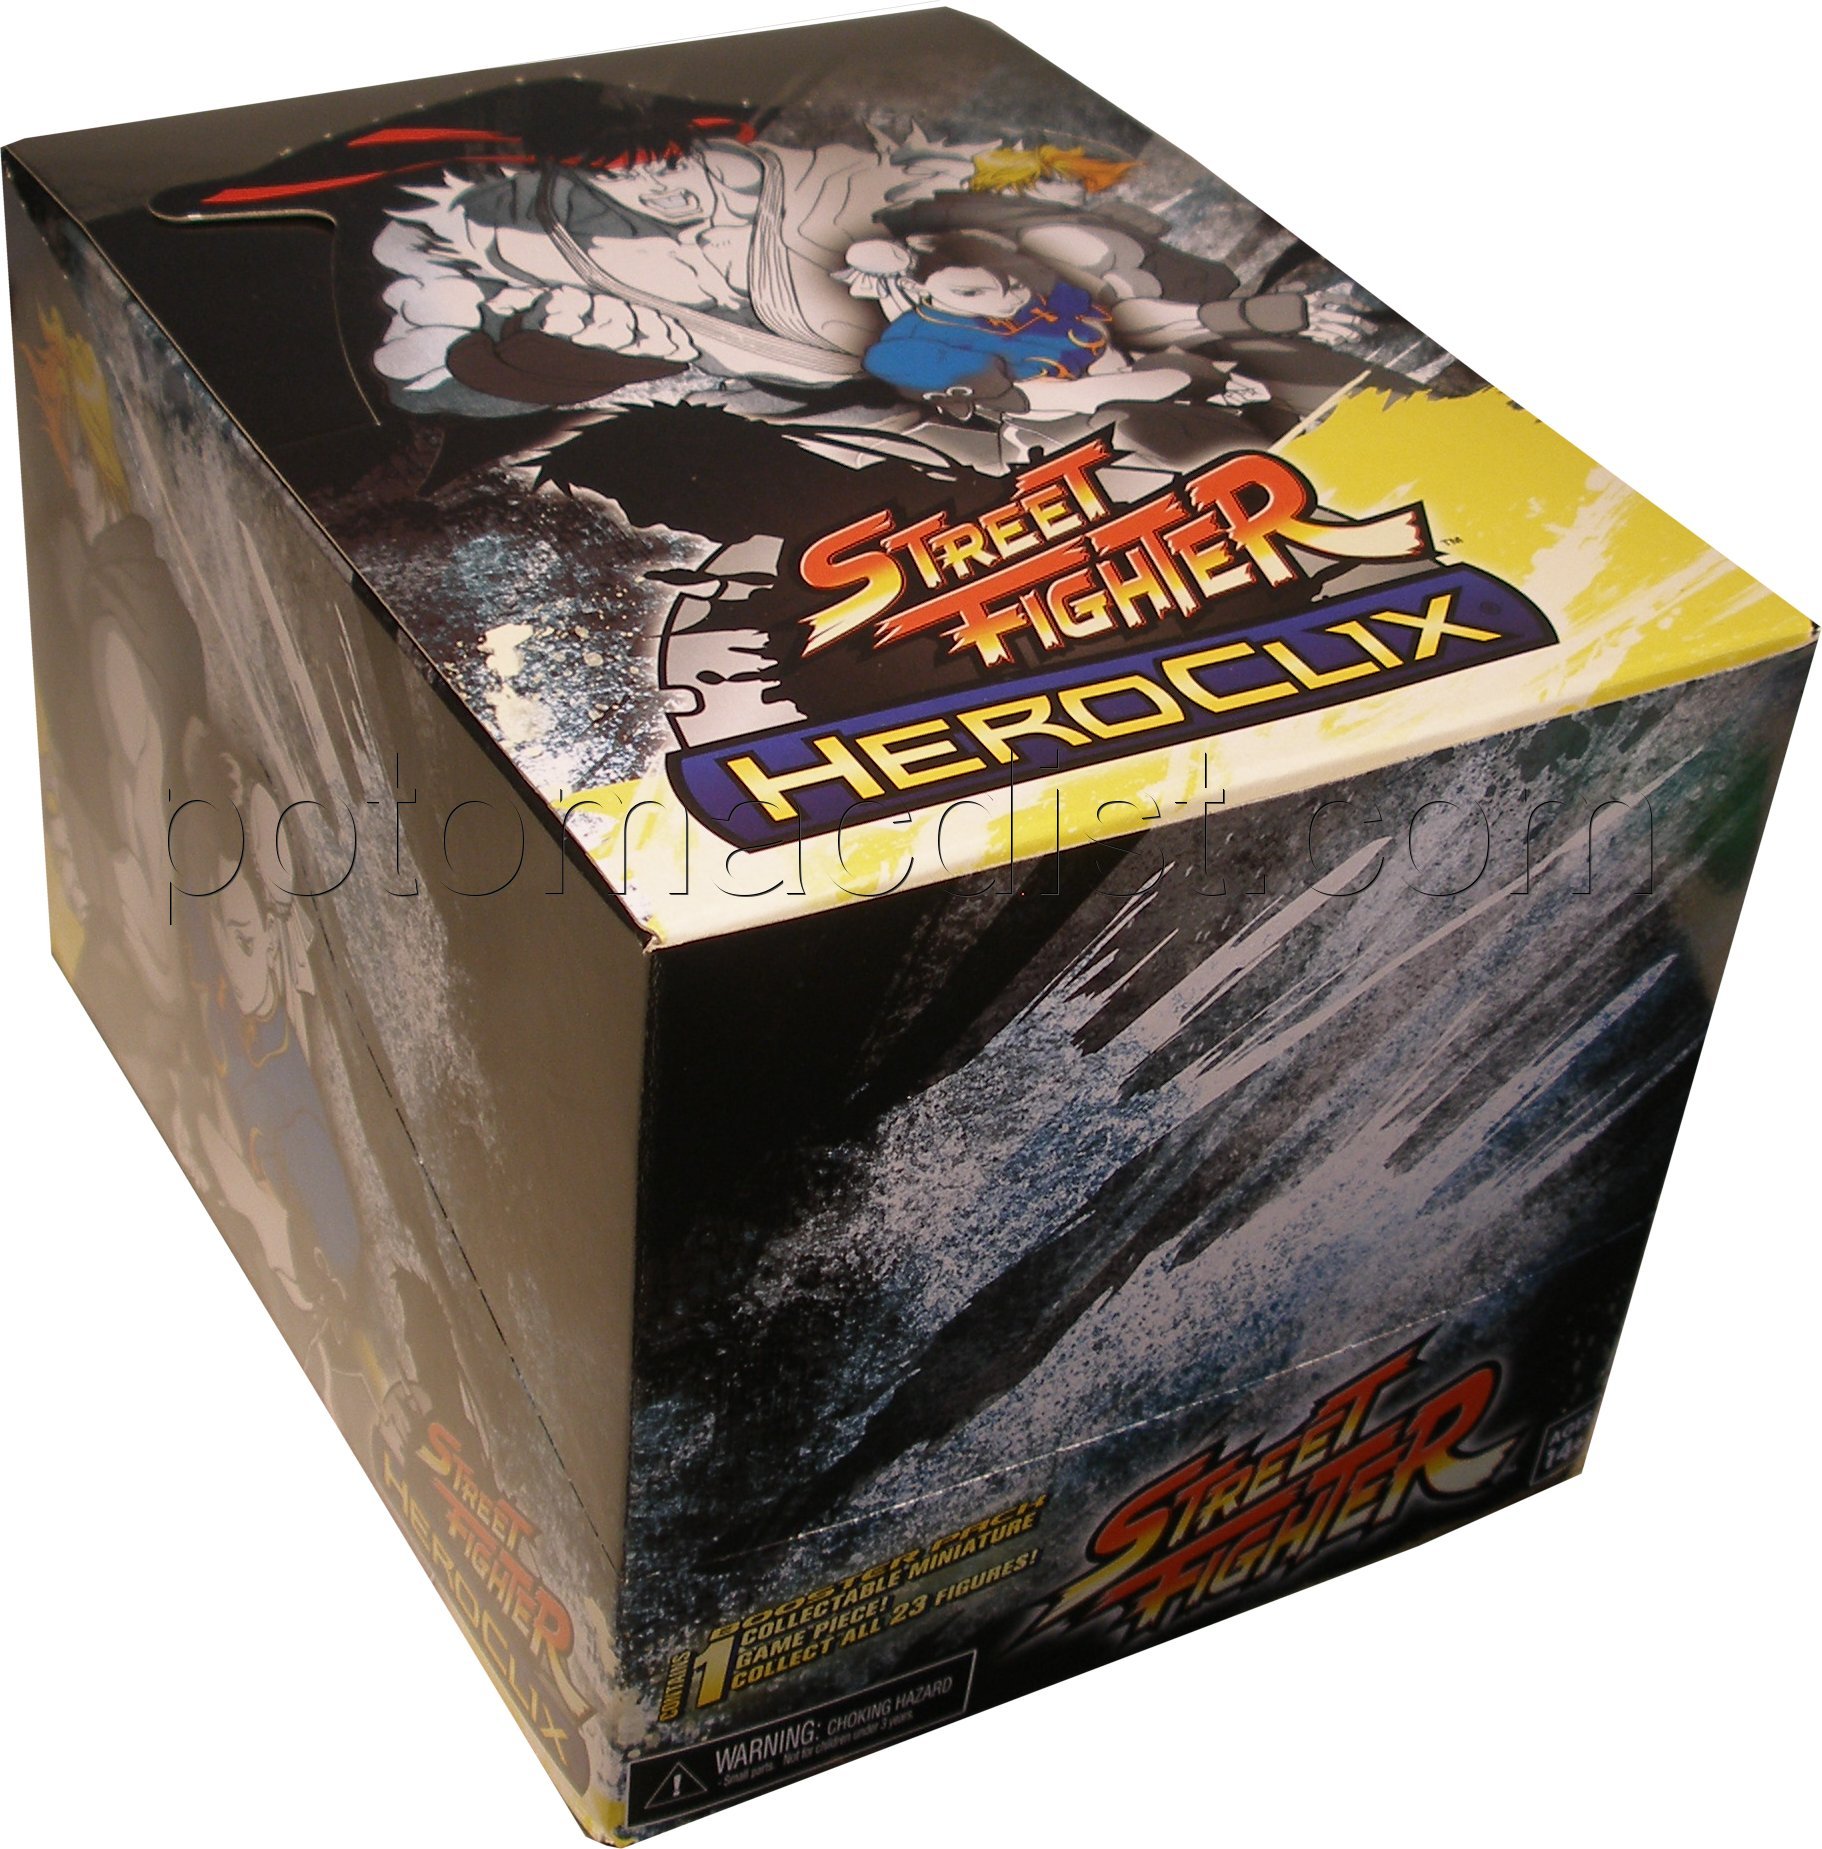 Details about   Street Fighter Heroclix Booster Box of 24 Figures 